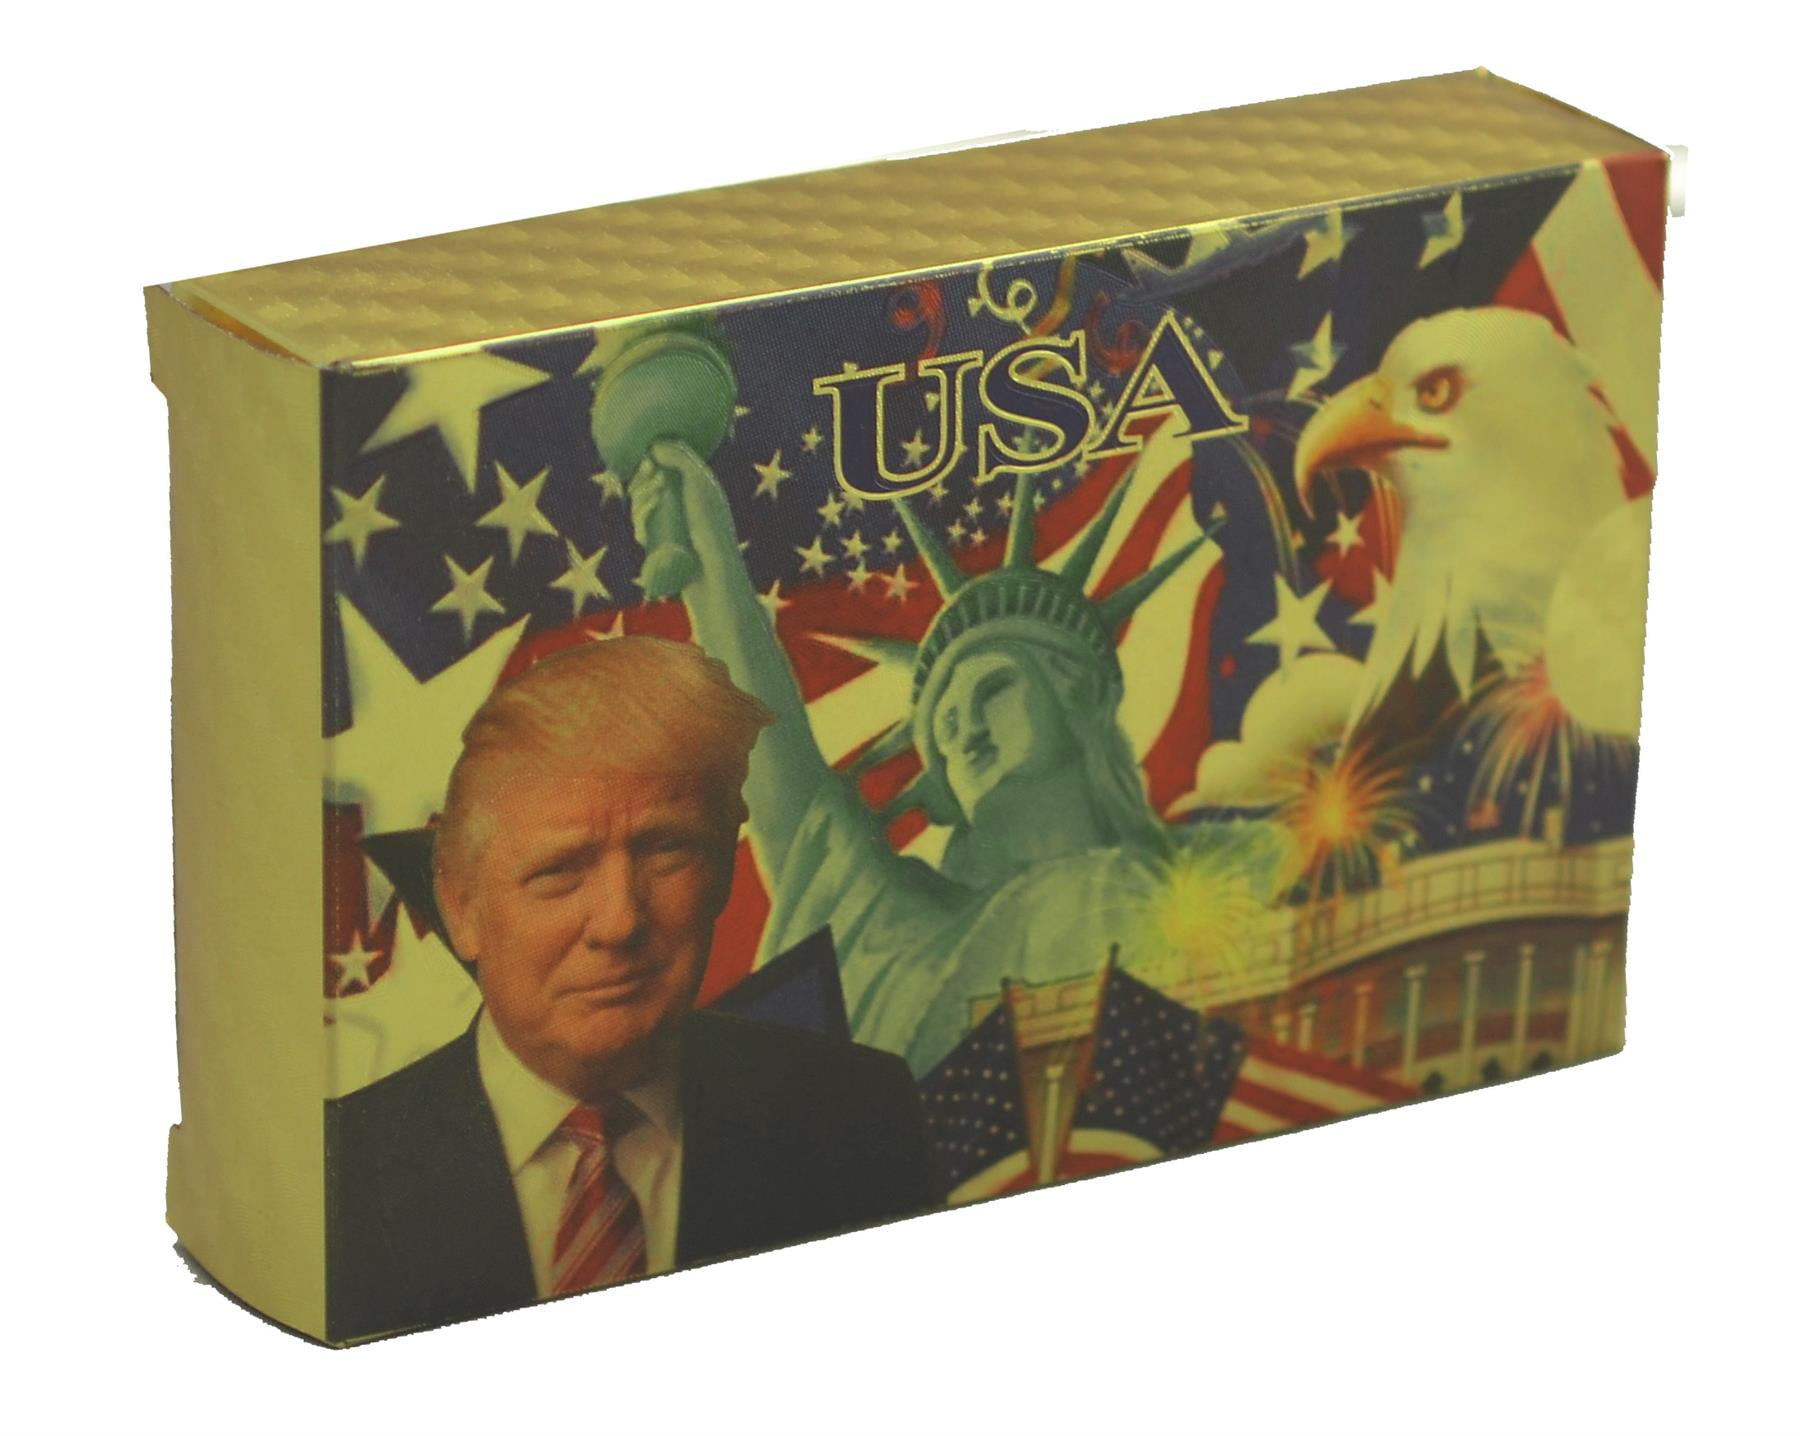 Pack of 2 USA Trump/Bald Eagle Waterproof Gold Foil Playing Cards 